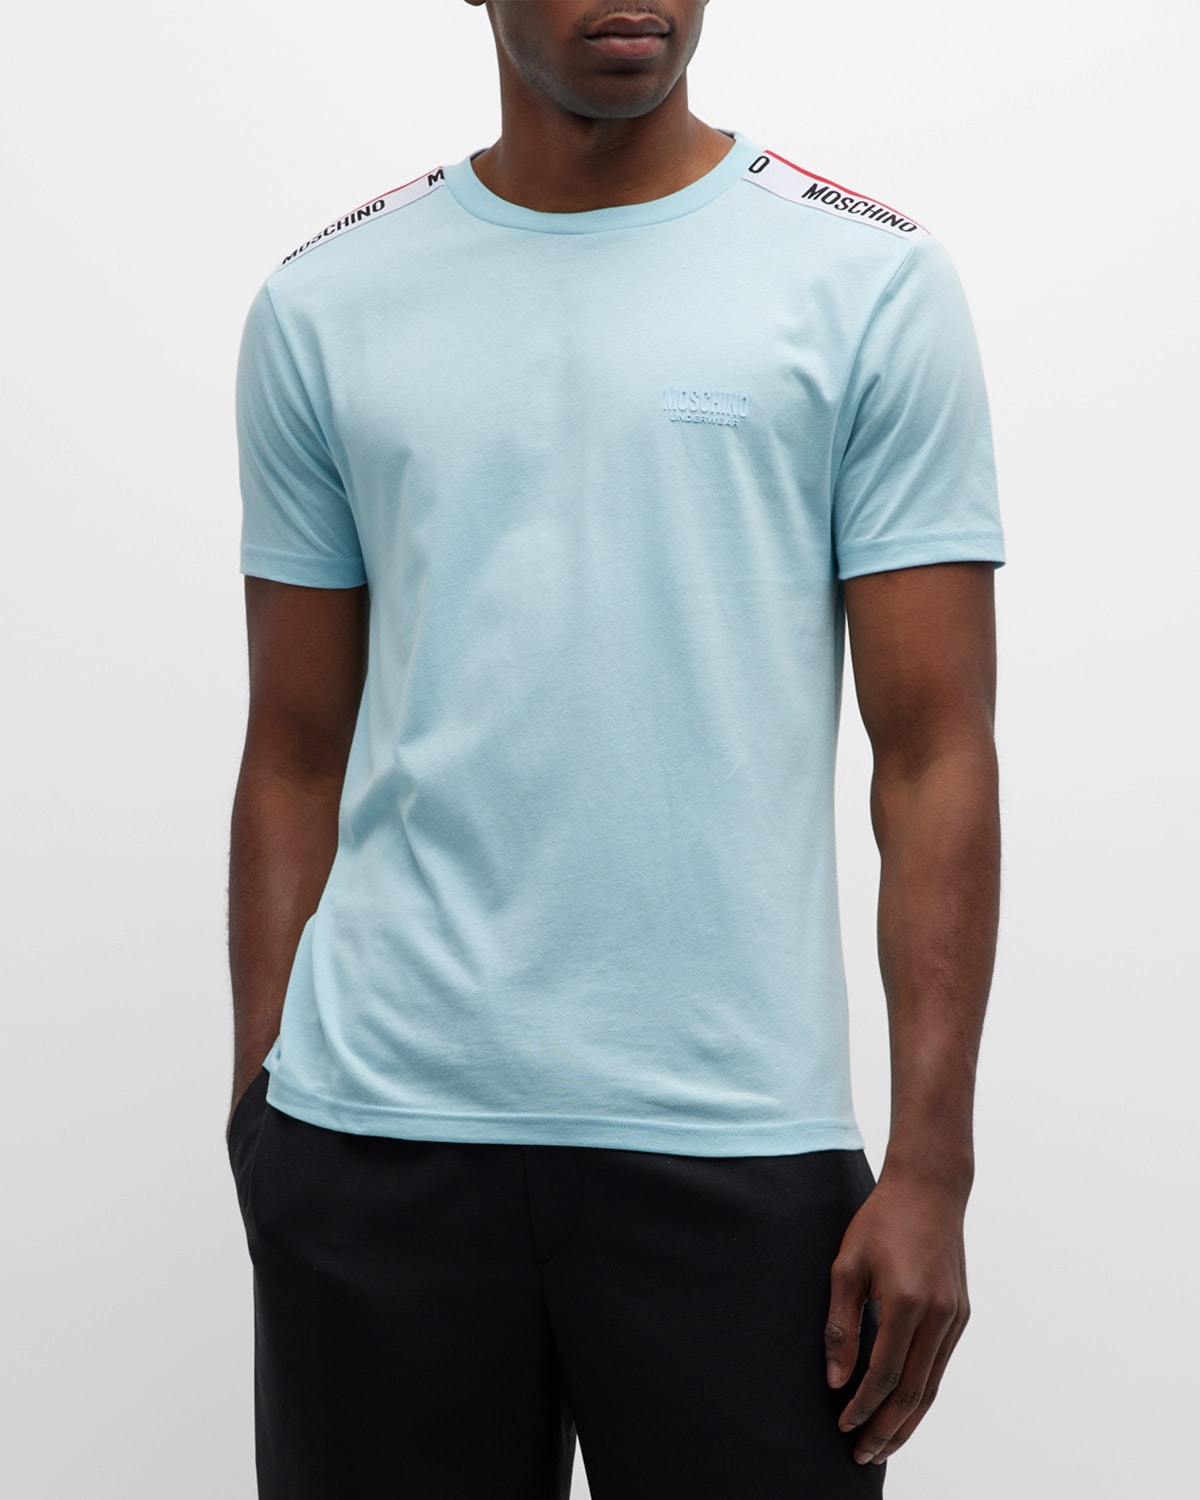 Moschino Men's T-shirt With Shoulder Taping In Light Blue